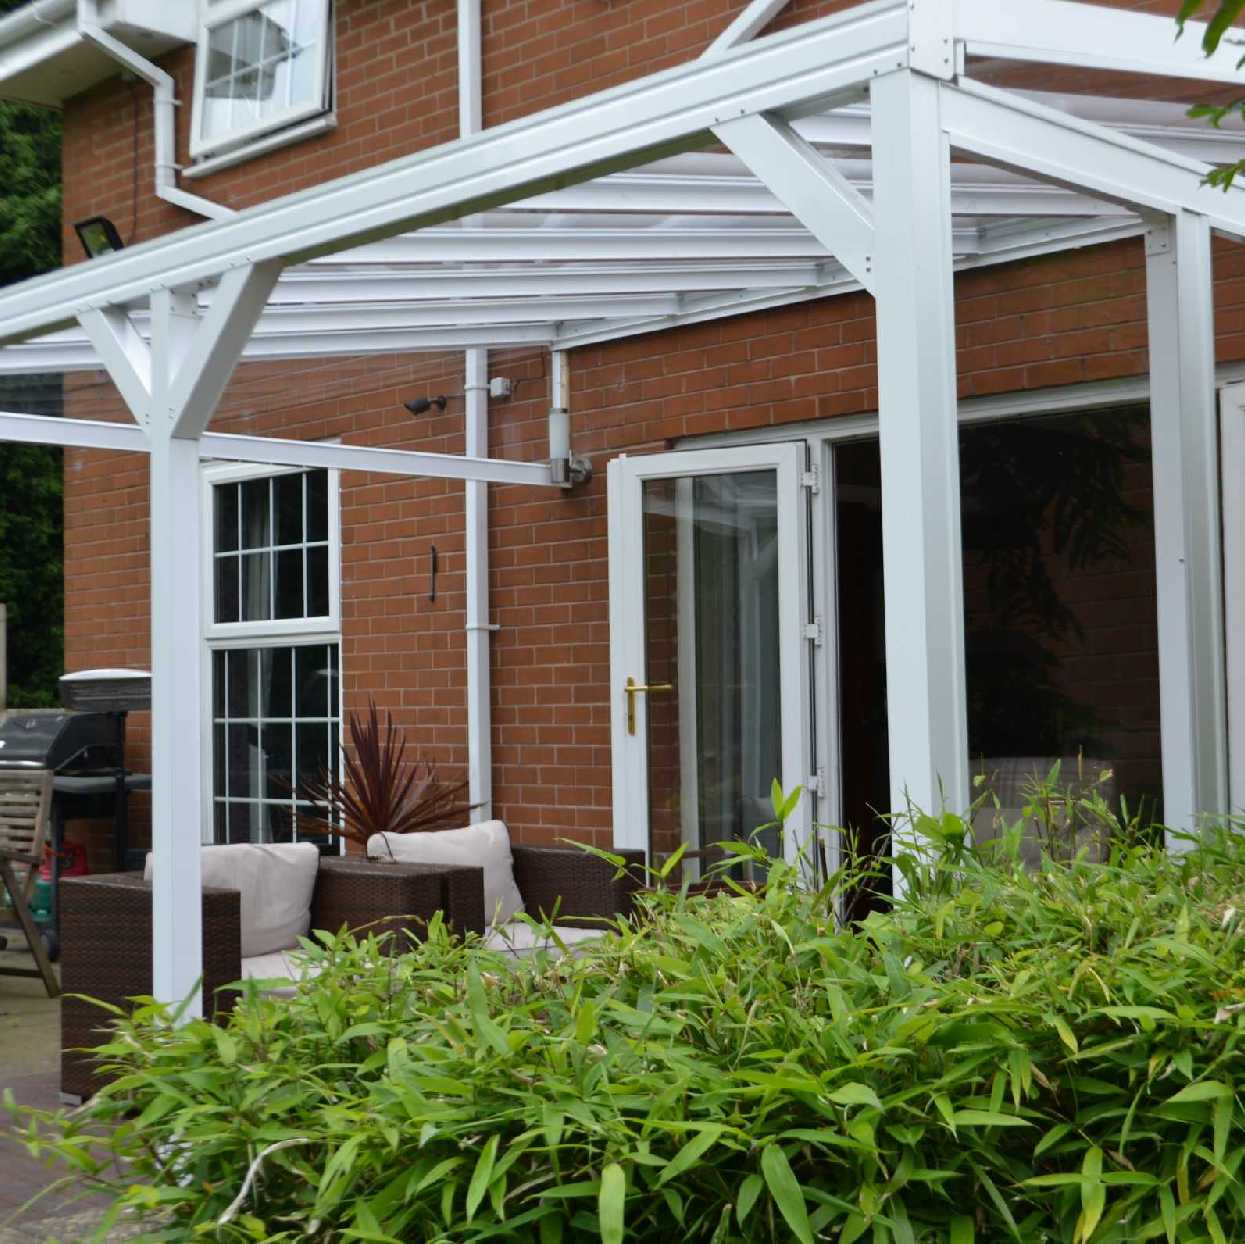 Omega Smart Lean-To Canopy, White UNGLAZED for 6mm Glazing - 4.9m (W) x 2.0m (P), (3) Supporting Posts from Omega Build